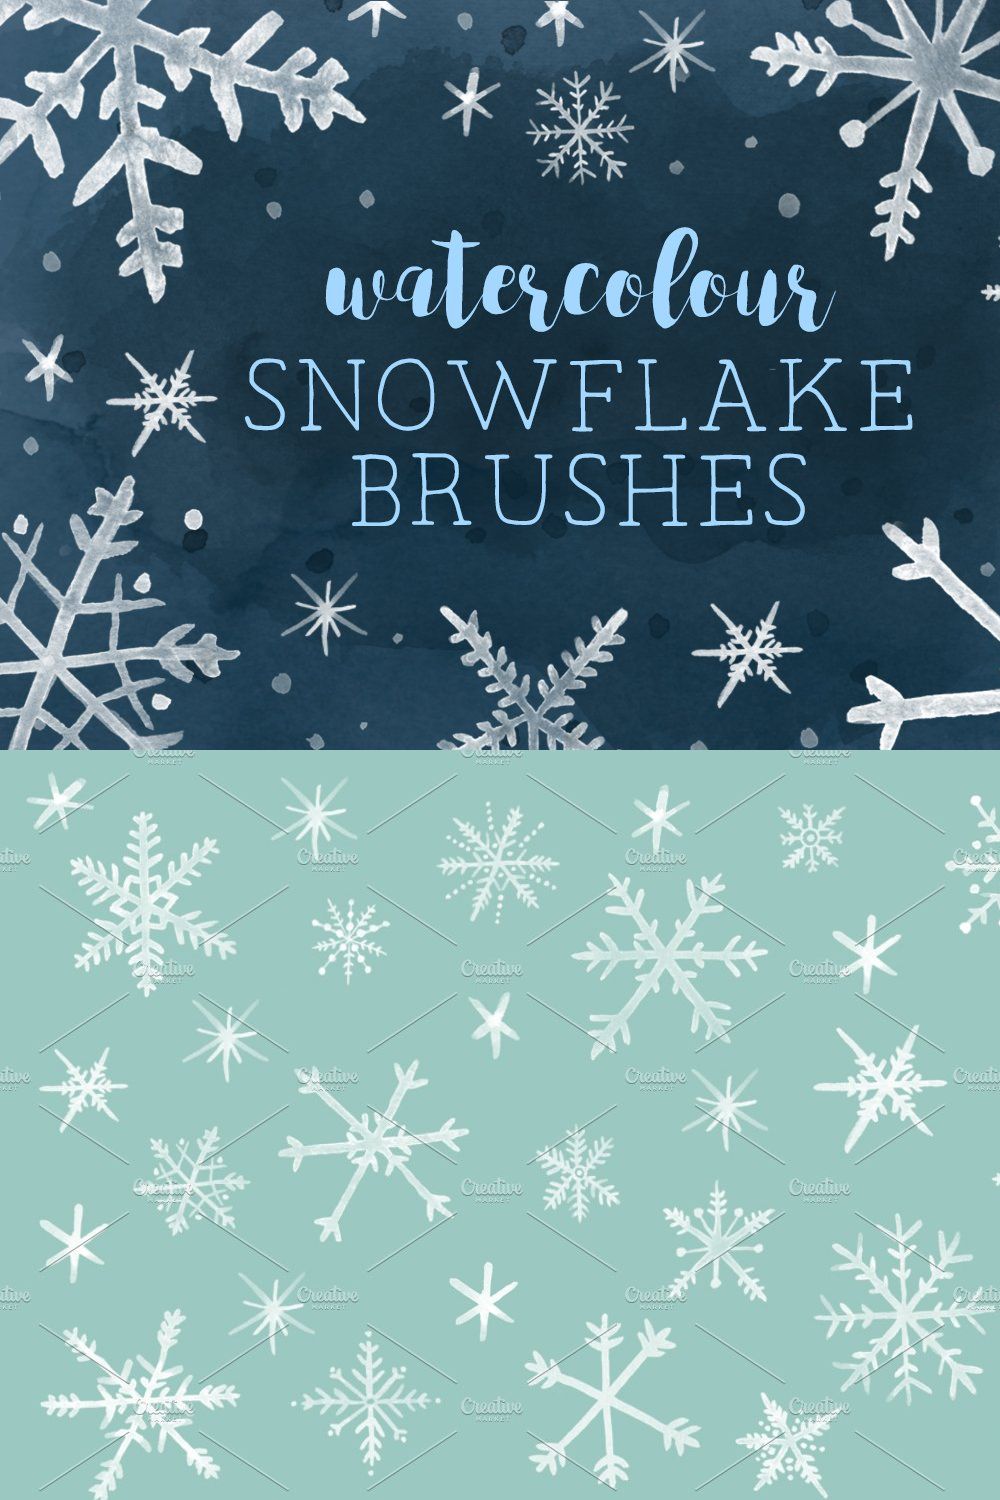 Watercolor snowflakes brushes (PS) pinterest preview image.